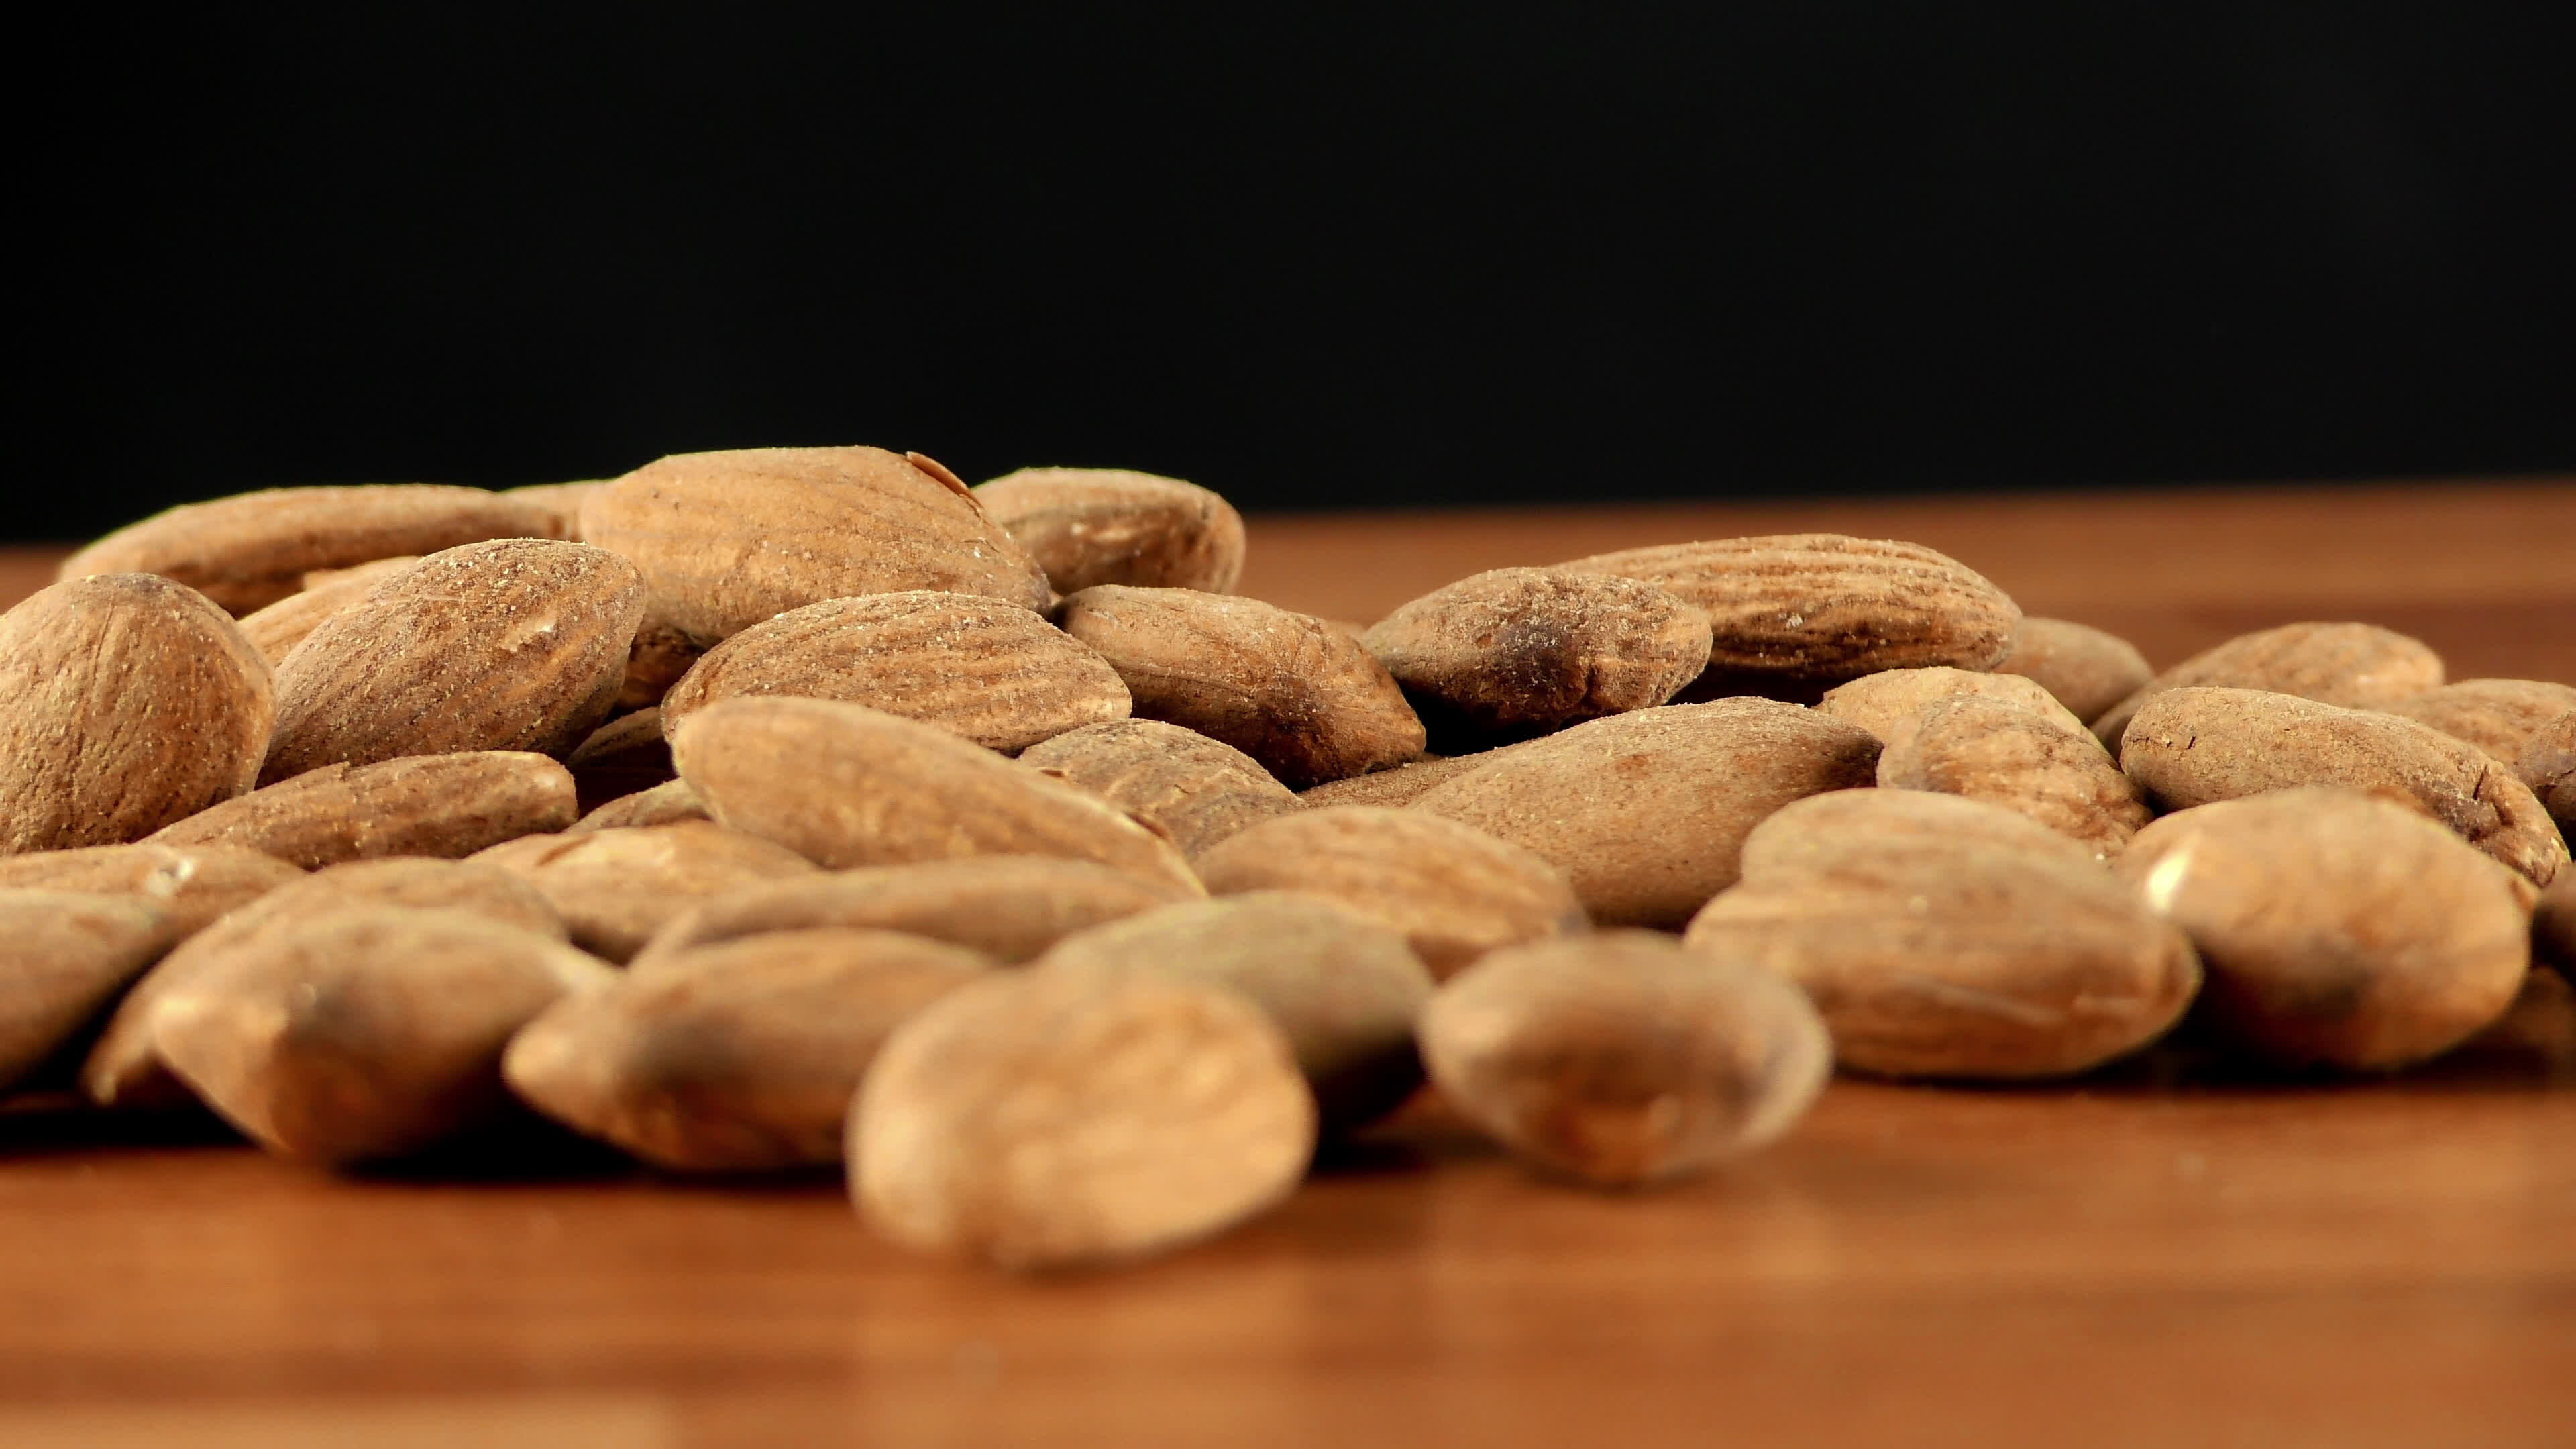 Almonds: The leading source of monounsaturated fat among commonly eaten nuts. 3840x2160 4K Background.